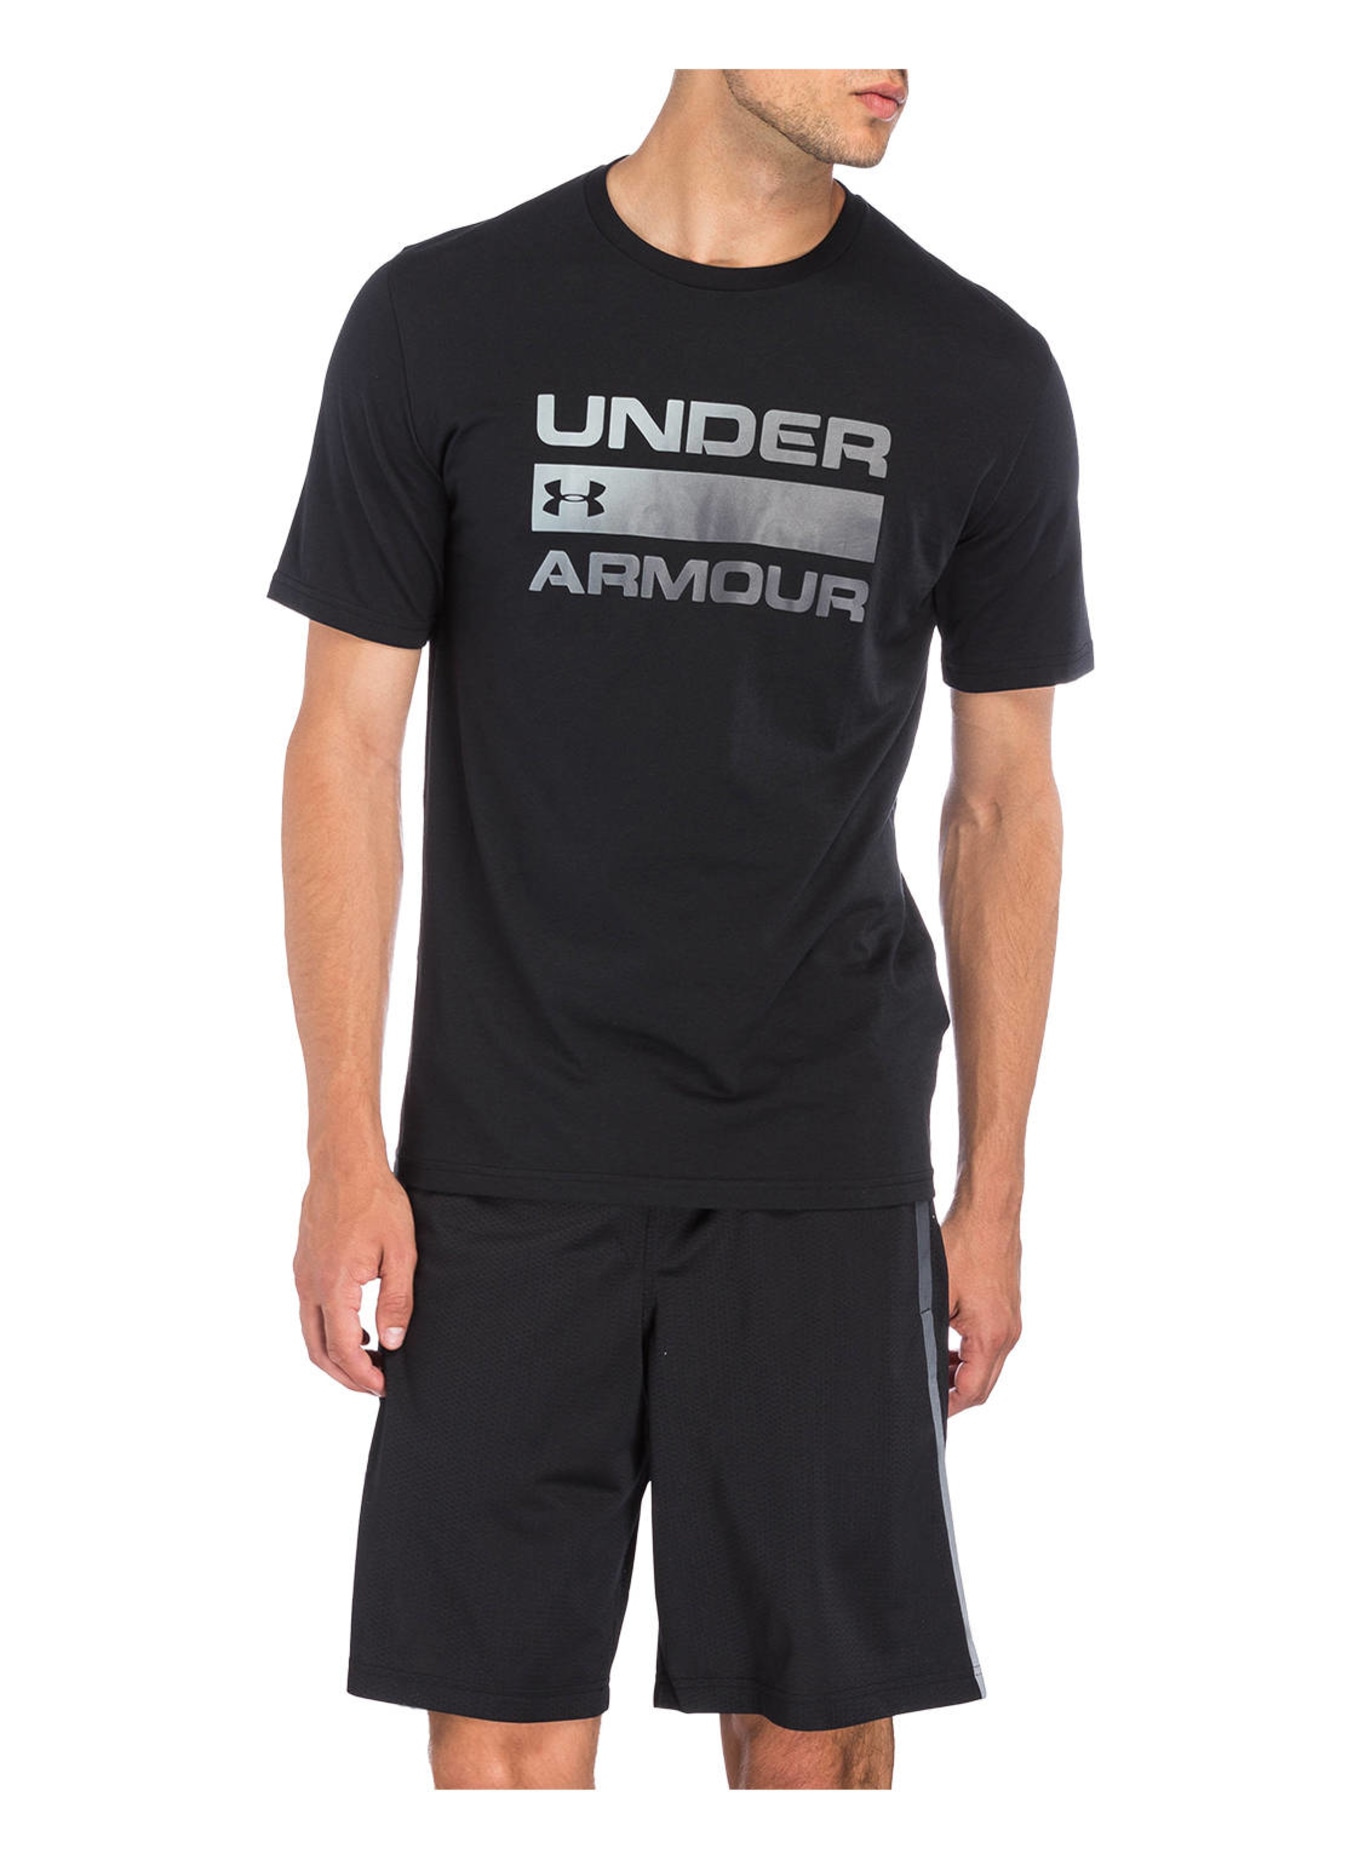 UNDER ARMOUR T-shirt TEAM ISSUE, Color: BLACK (Image 2)